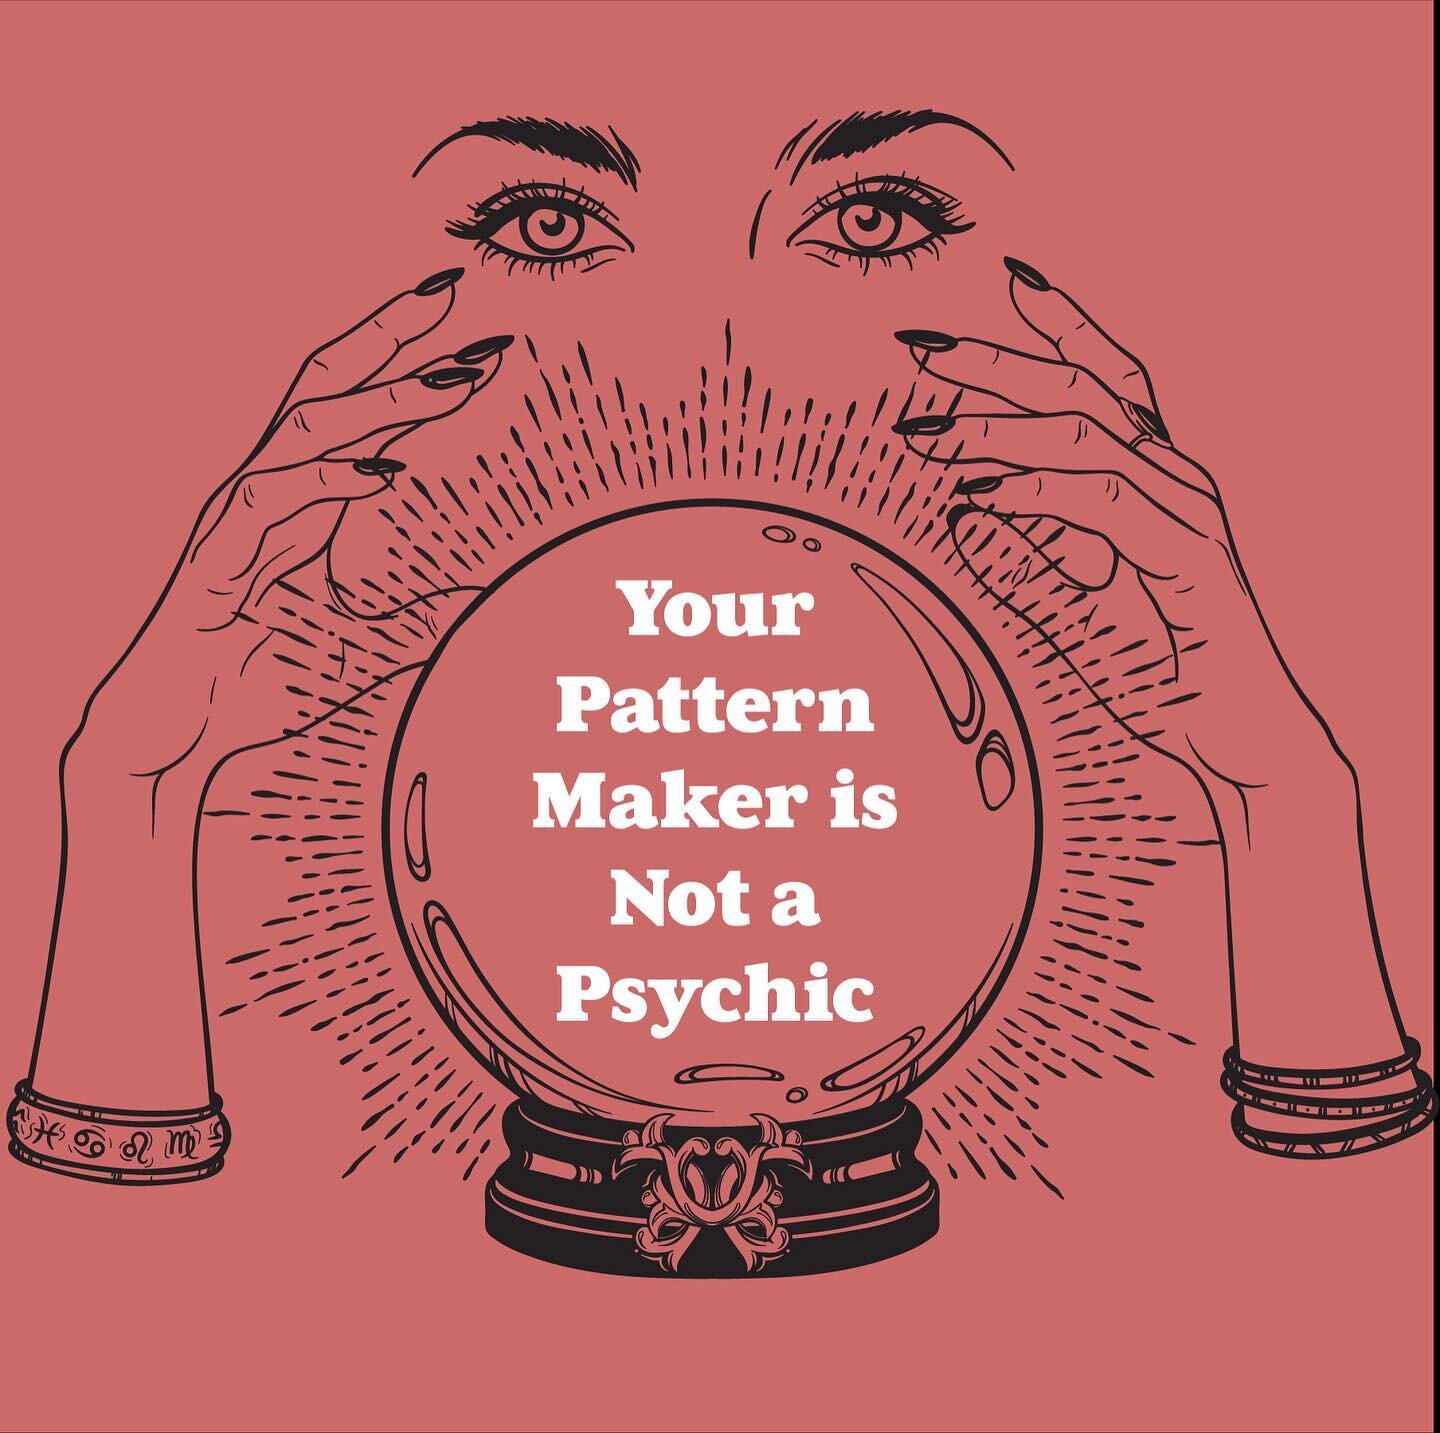 &hellip; or maybe they are&hellip;.but most likely your pattern maker doesn&rsquo;t inherently know specific and critical details about your vision that help us do the work. Check out the full post on the blog: 

https://www.garmentaapparel.com/blog/